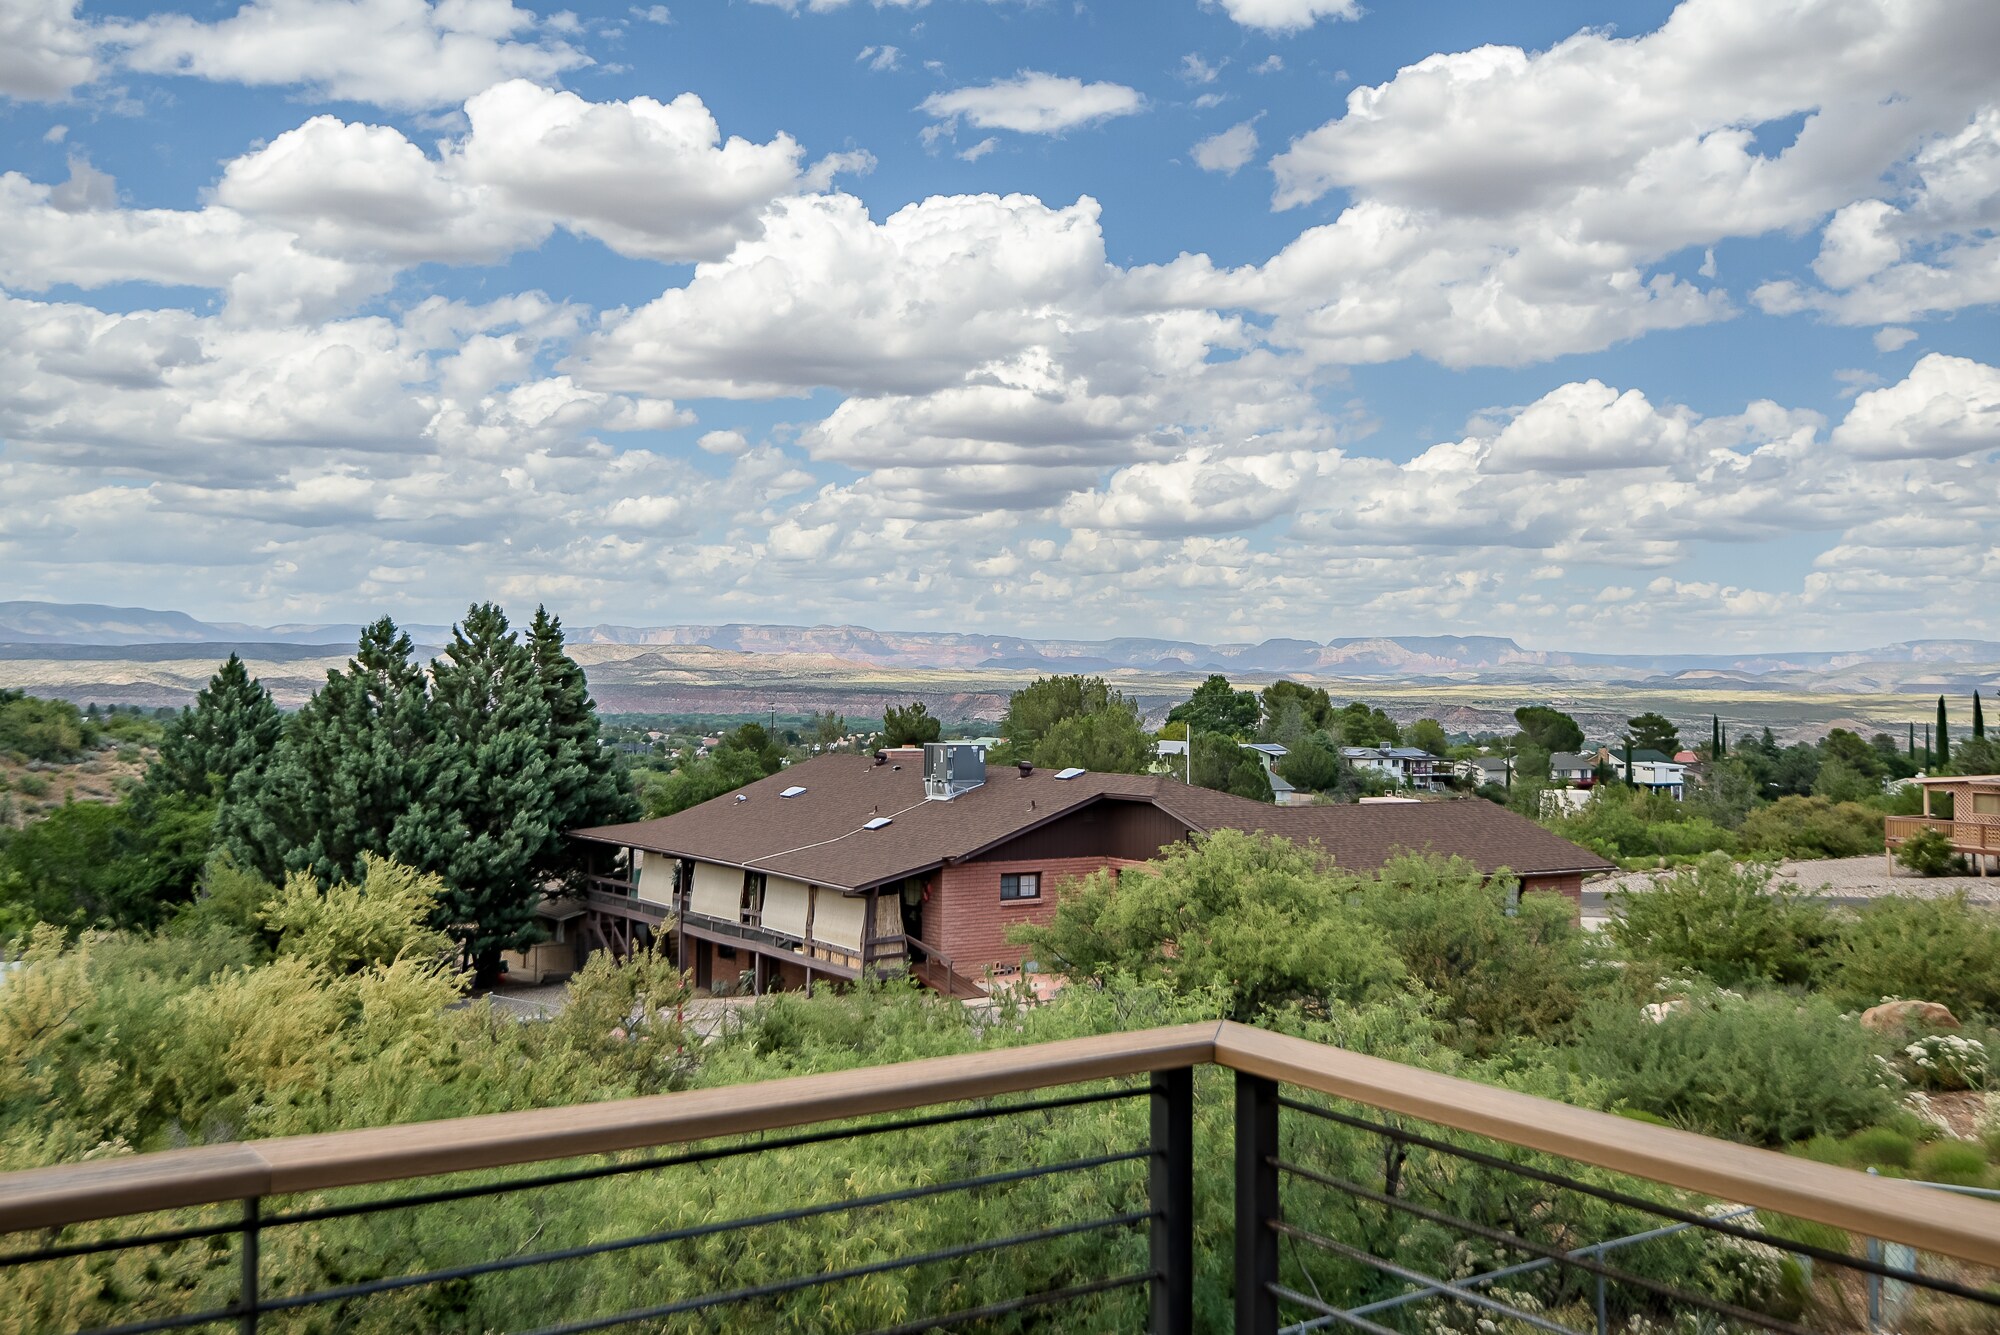 Scenic views from wrap-around deck of surrounding areas